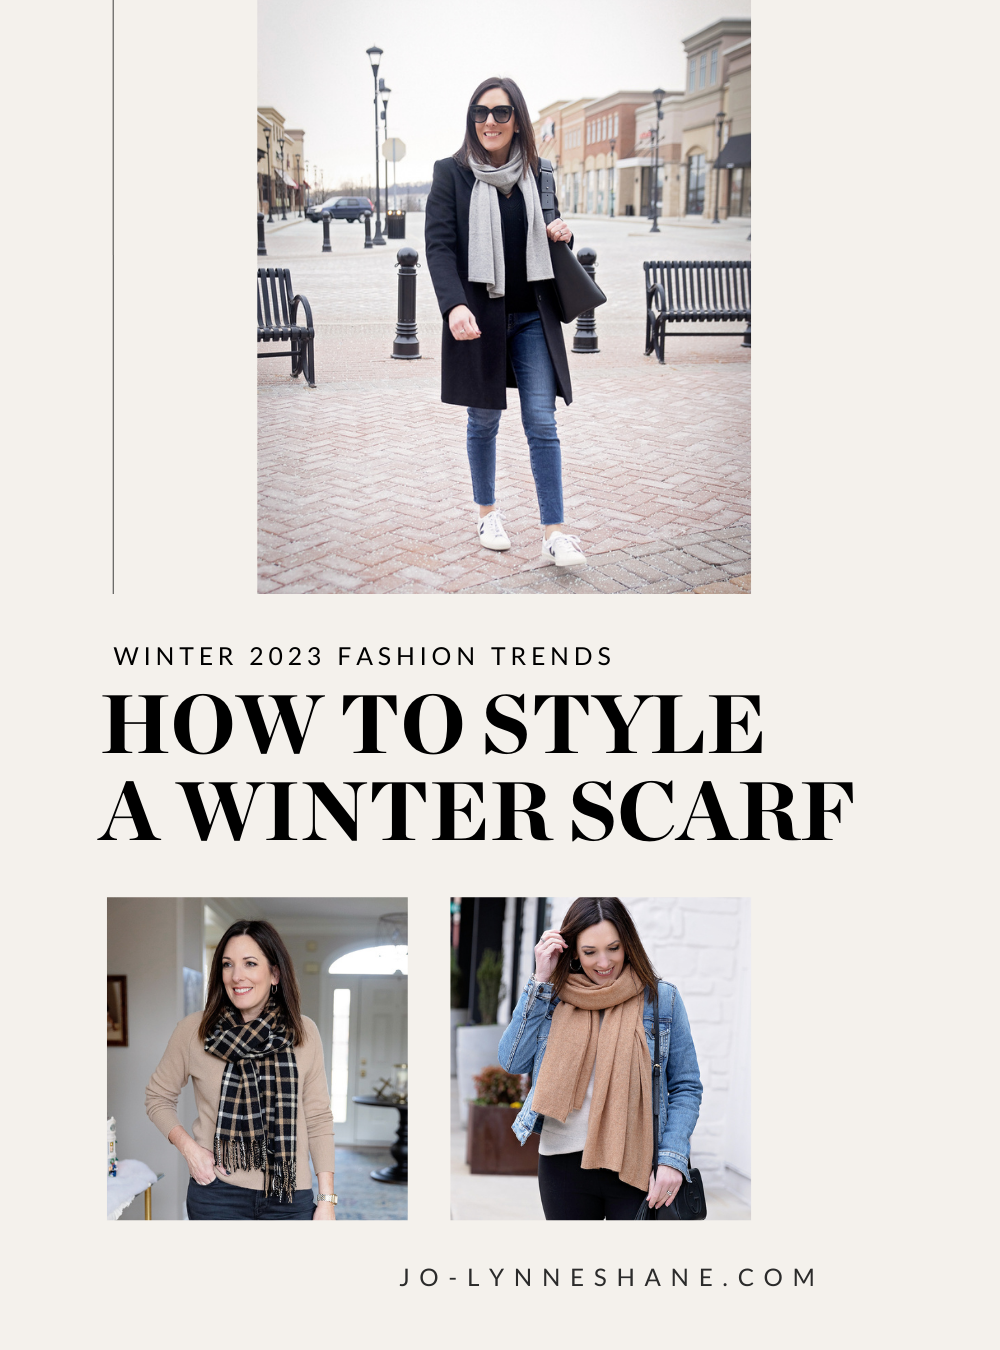 Are Scarves Still In Style? Here's how to wear a winter scarf in 2023...